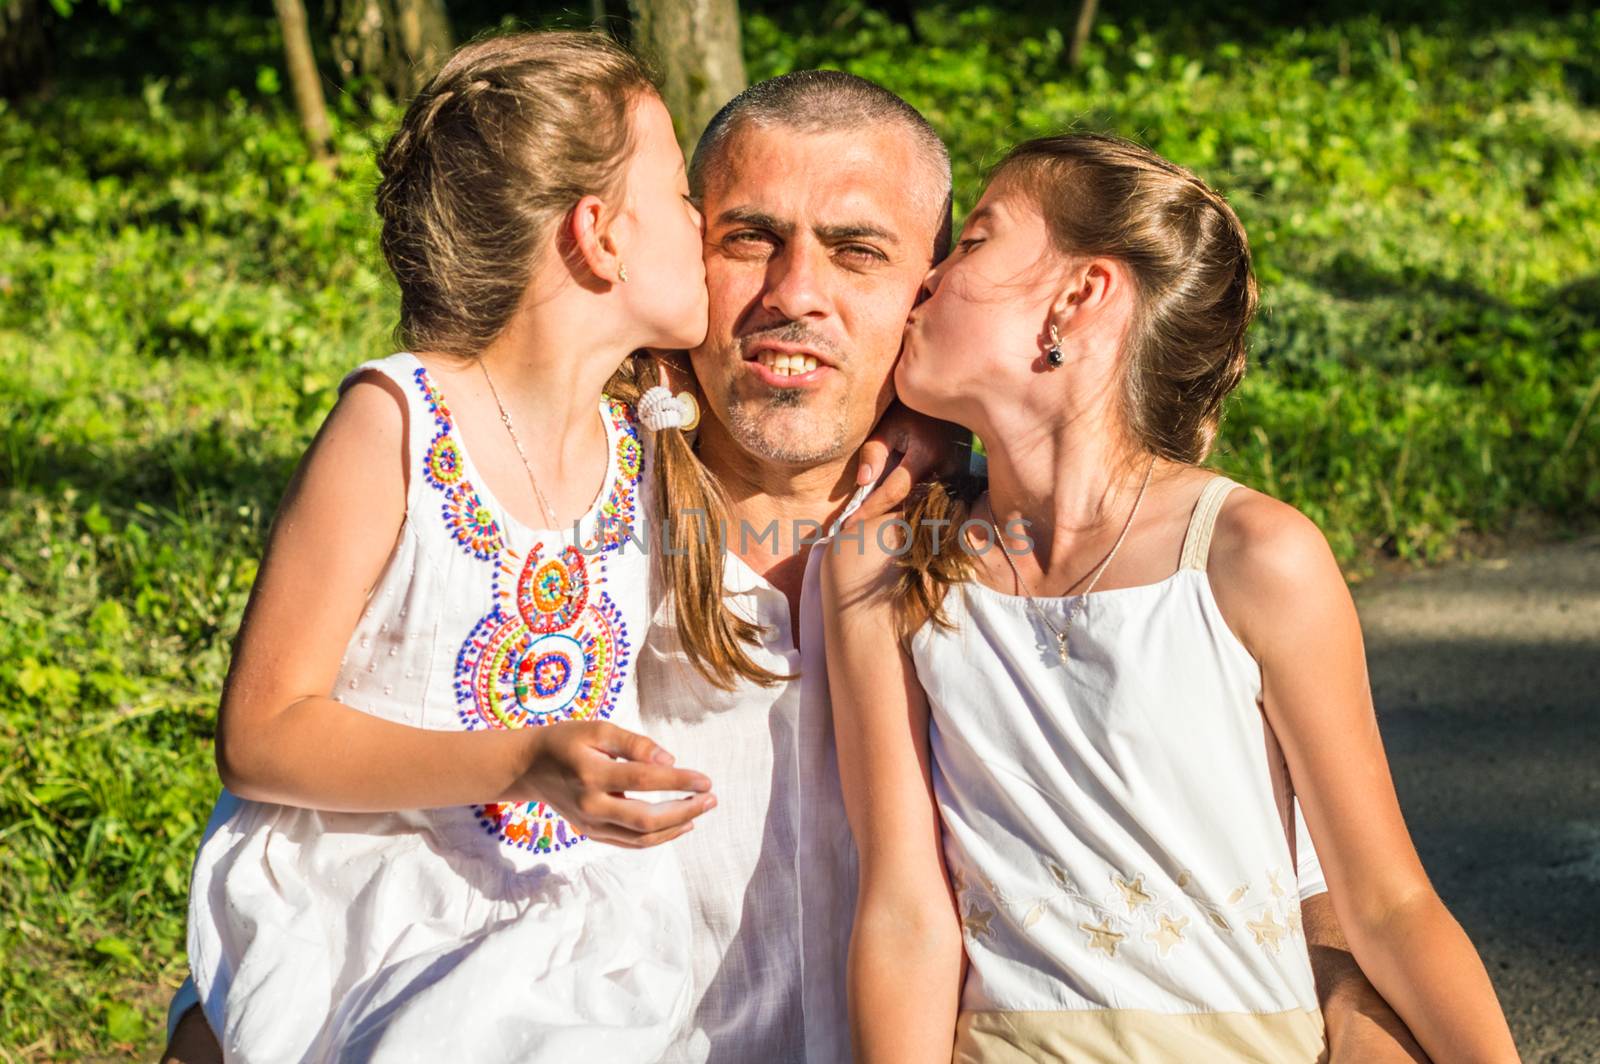 Daddy hugs his daughters in the Park